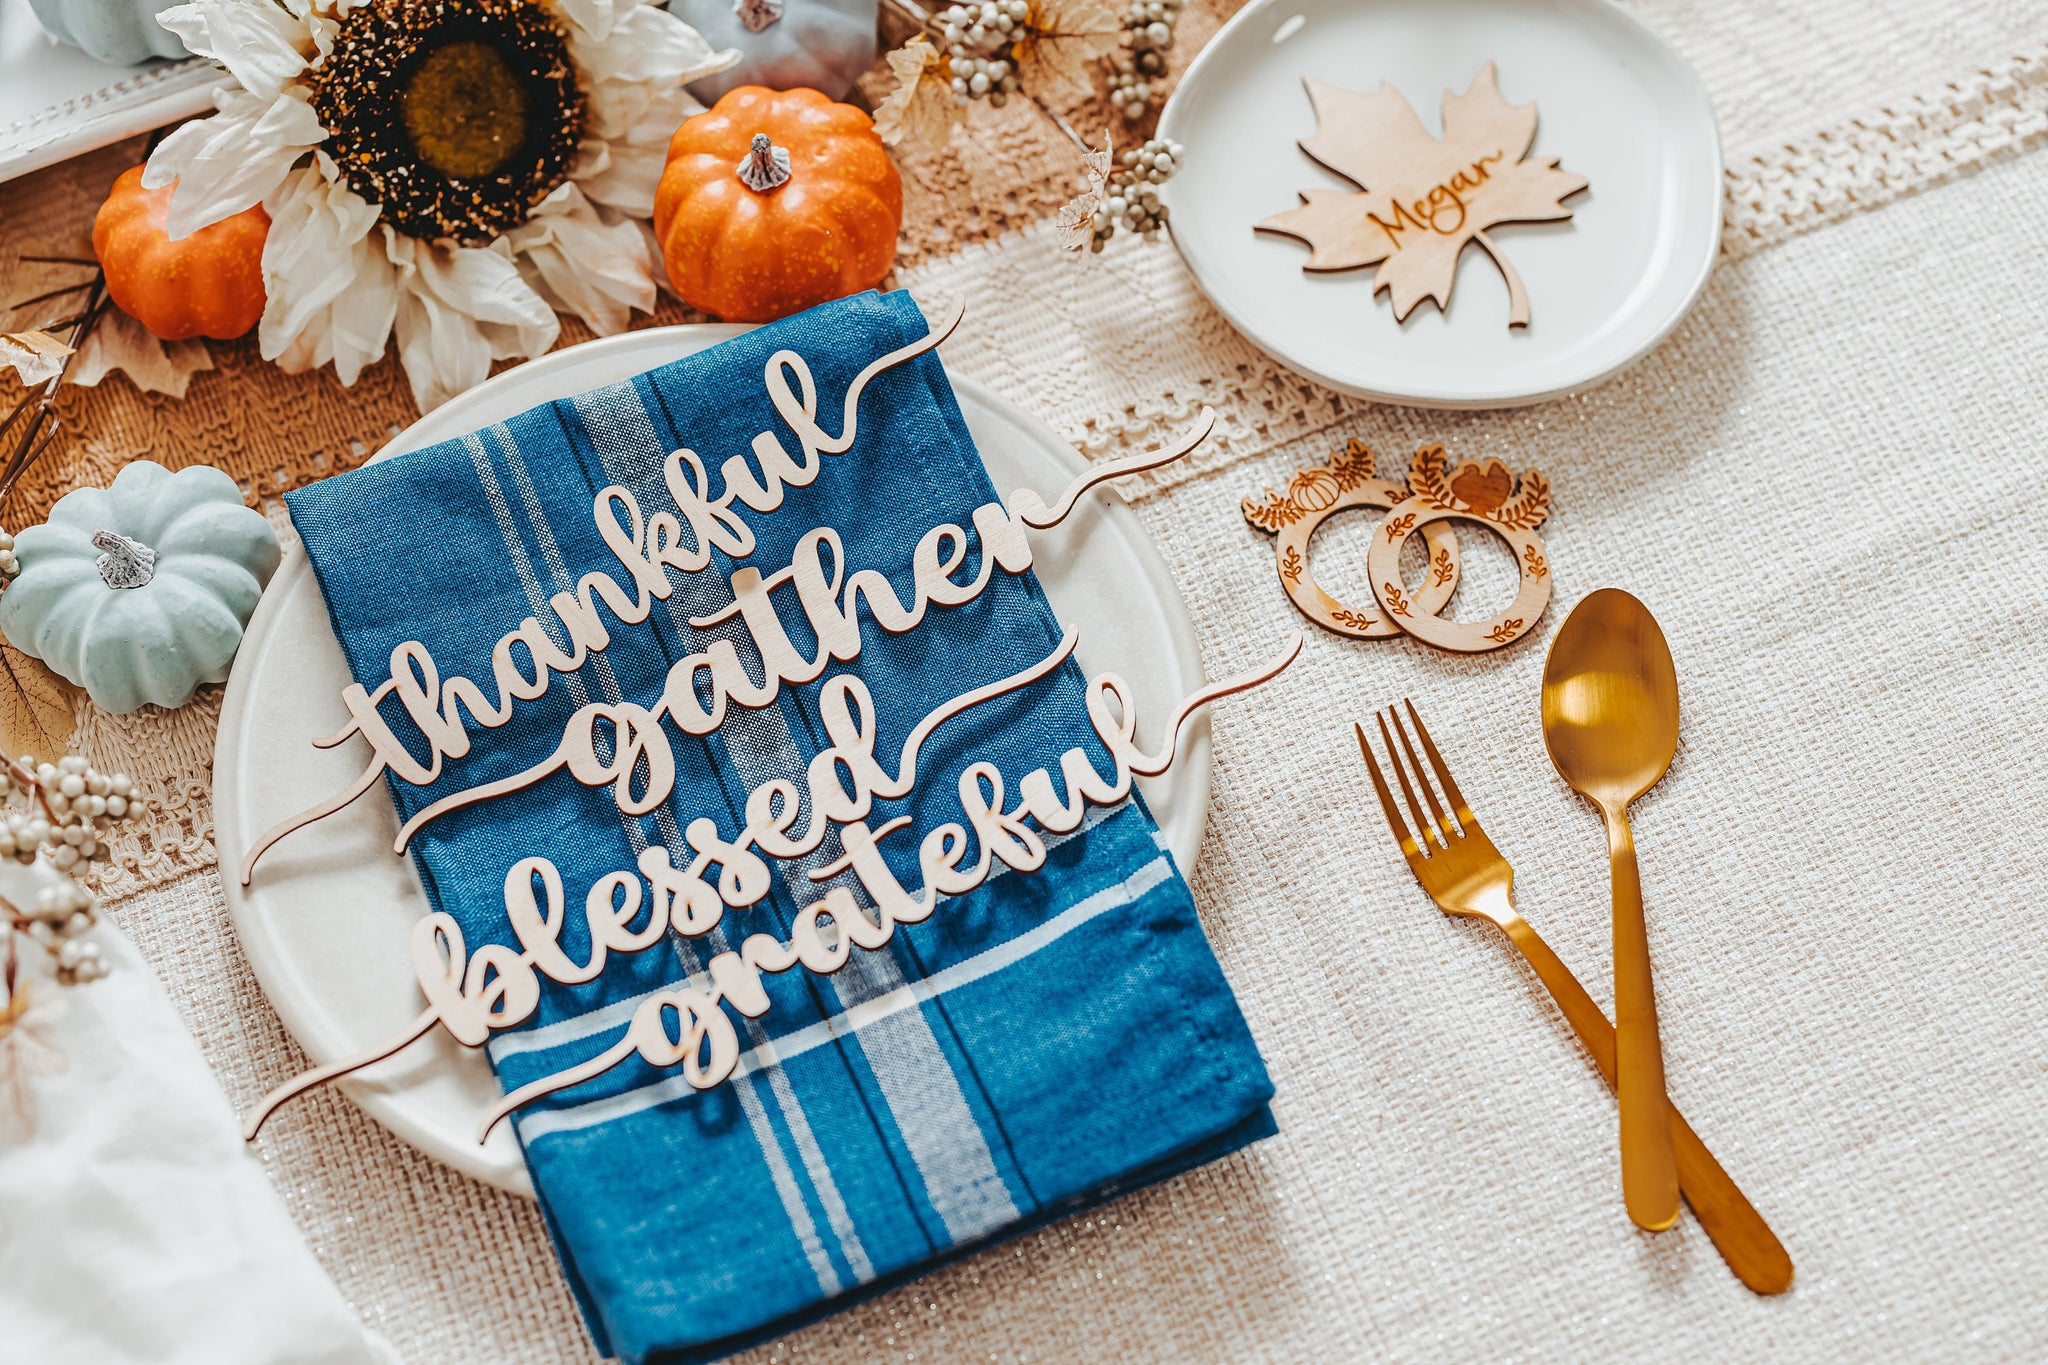 10 inch Thankful Grateful Blessed Gather Thanksgiving Dinner Placards For Large Gatherings, Thanksgiving Dinner Table Decor For Holiday